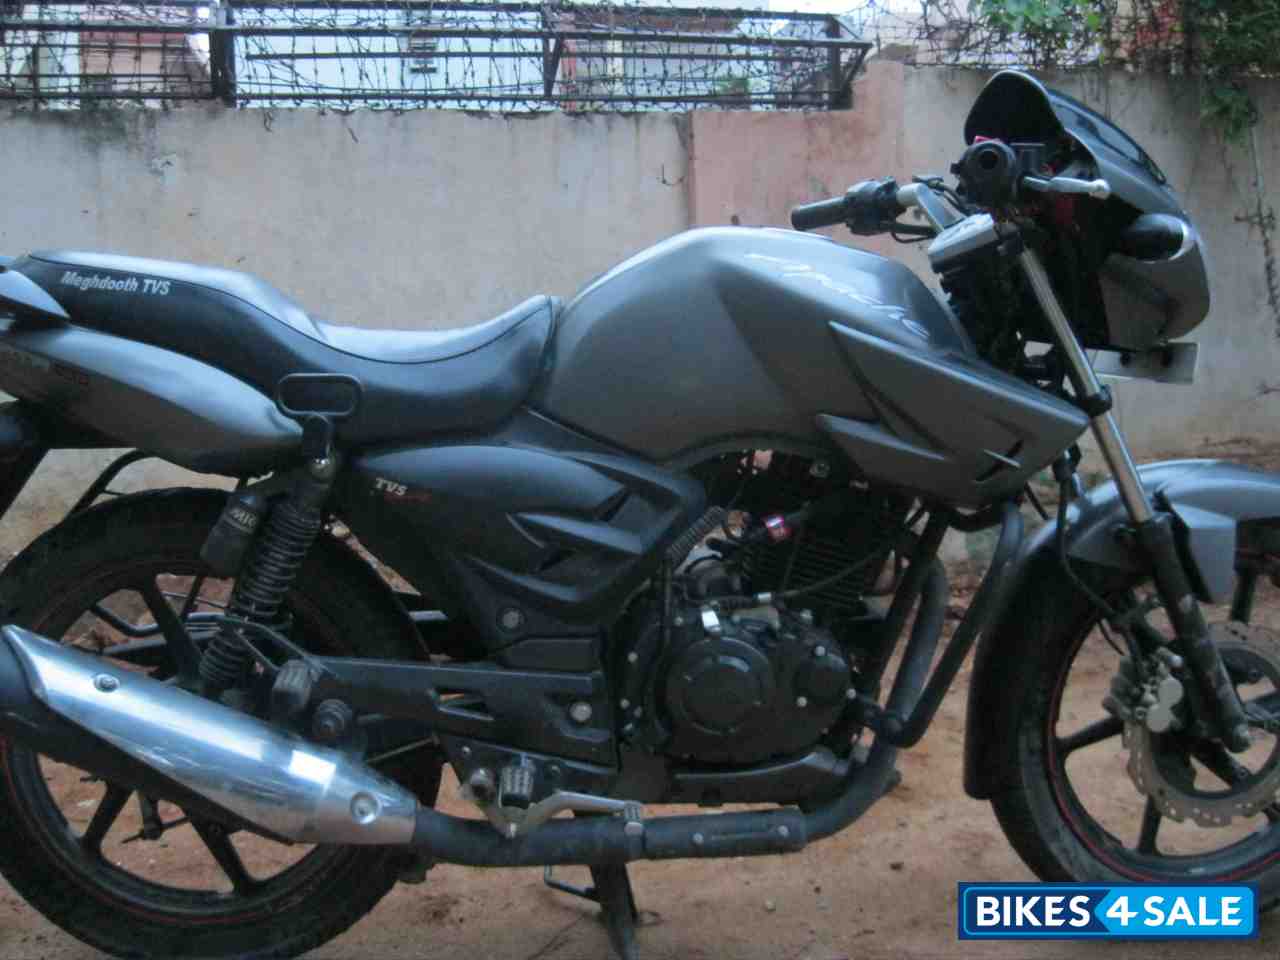 Used 10 Model Tvs Apache Rtr 160 For Sale In Bangalore Id Grey Colour Bikes4sale